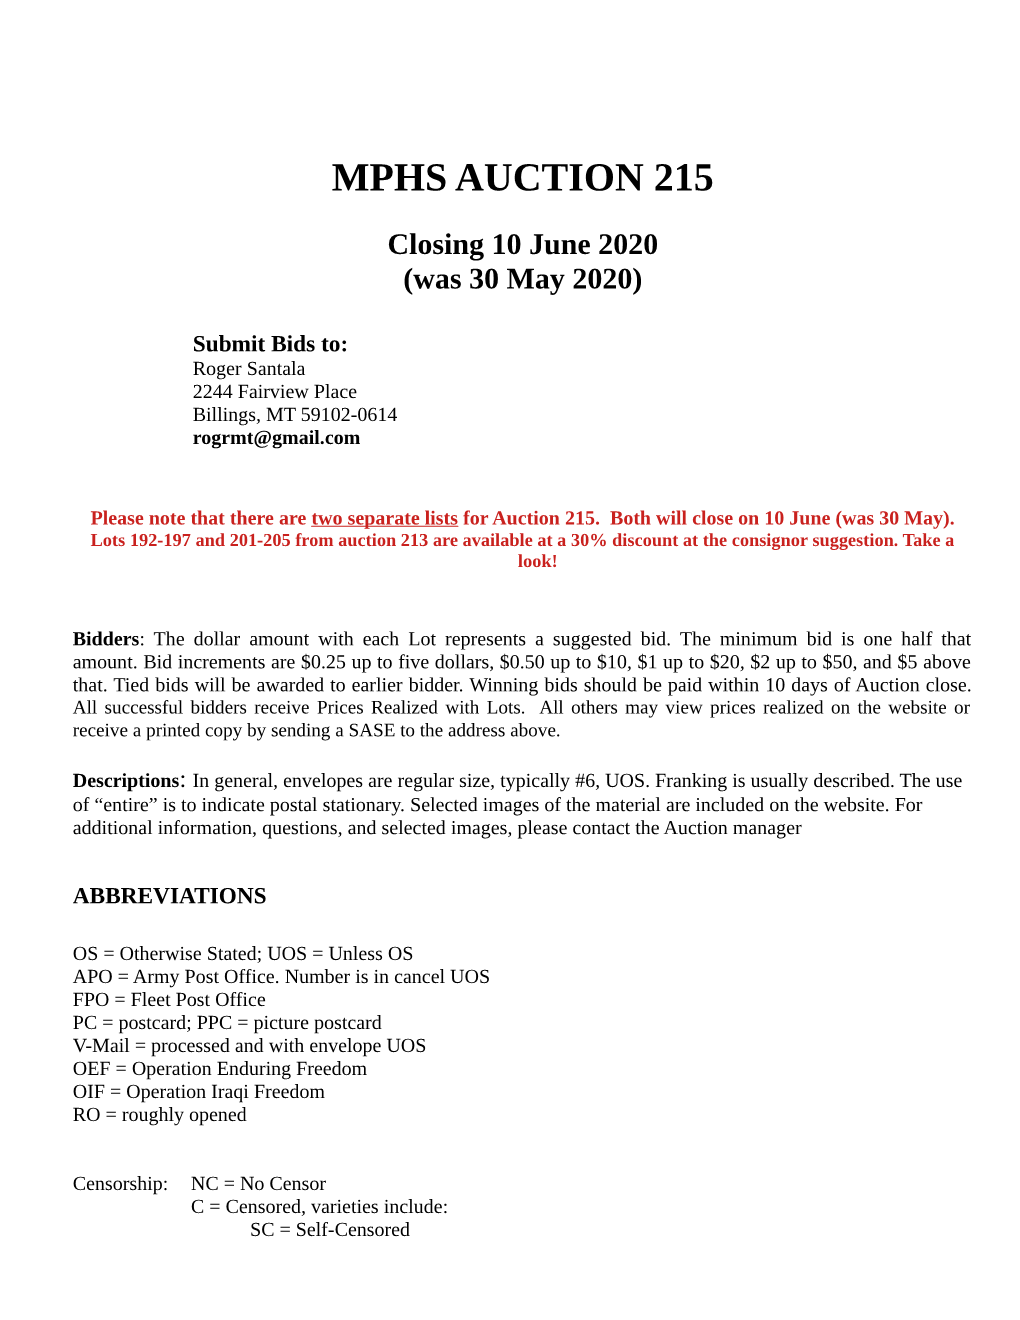 Military Postal History Society Auction Listing, Auction 215, Closing June